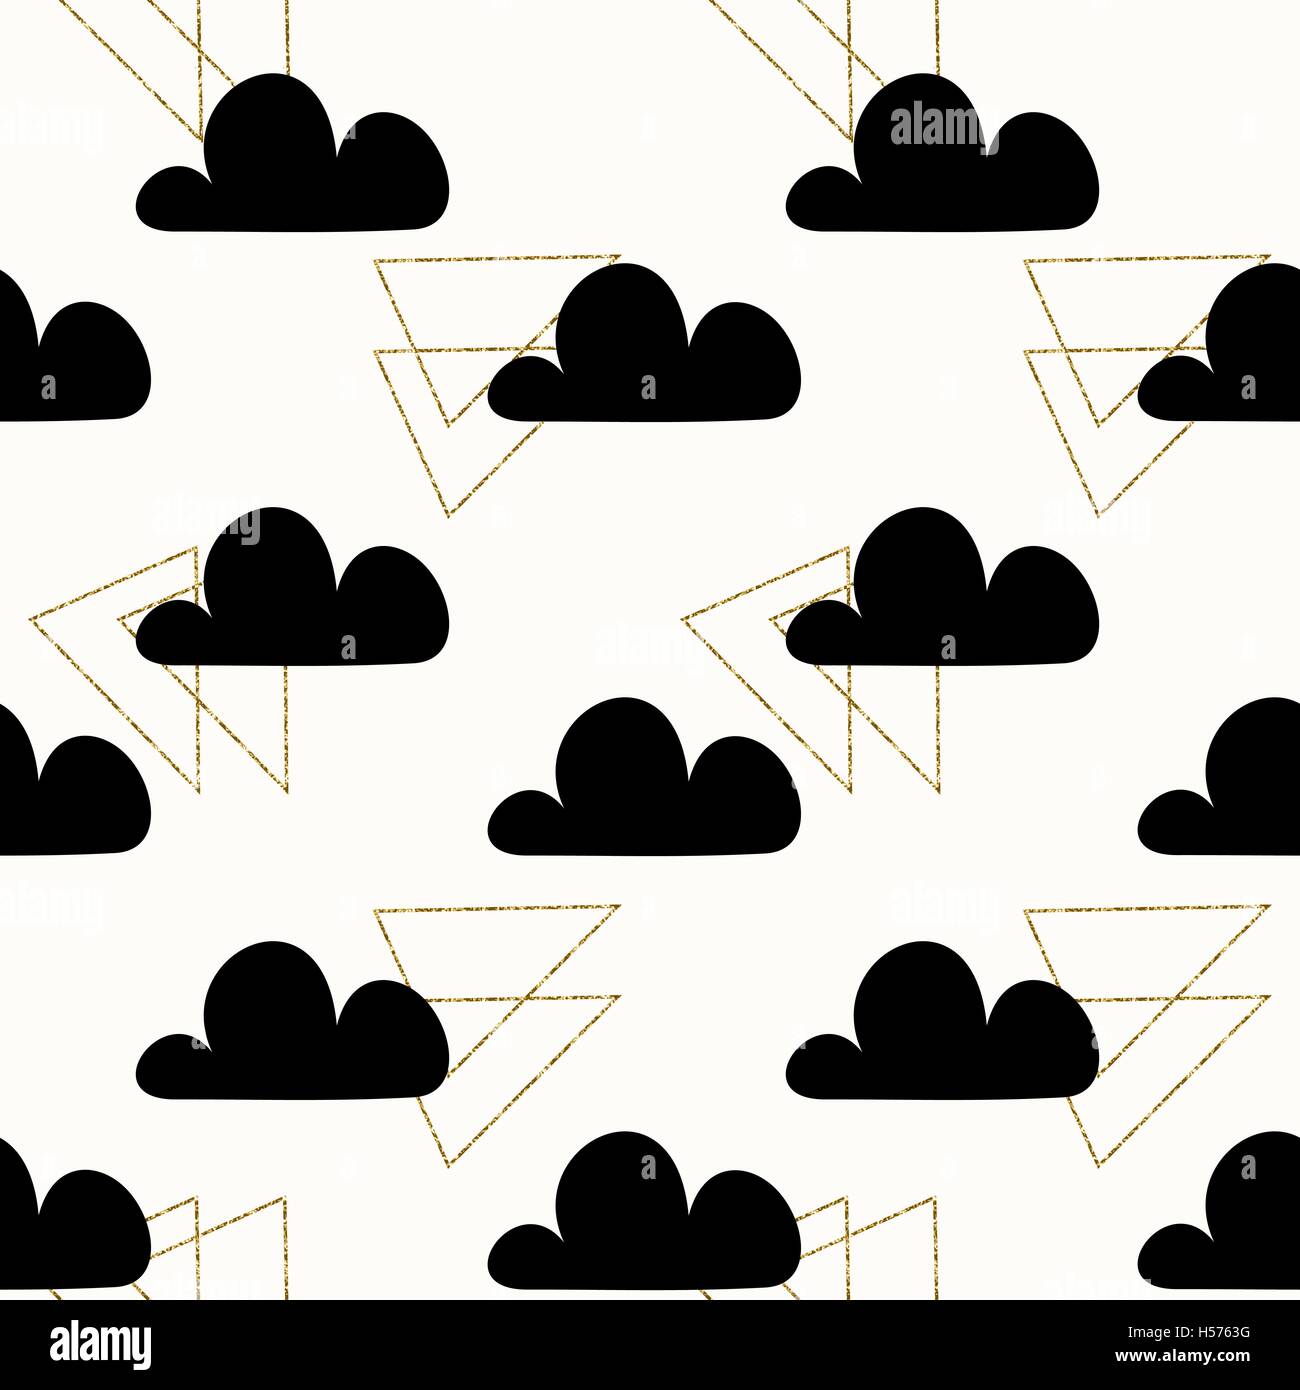 Seamless repeating pattern with black clouds and gold glitter triangle shapes on white background. Stock Vector